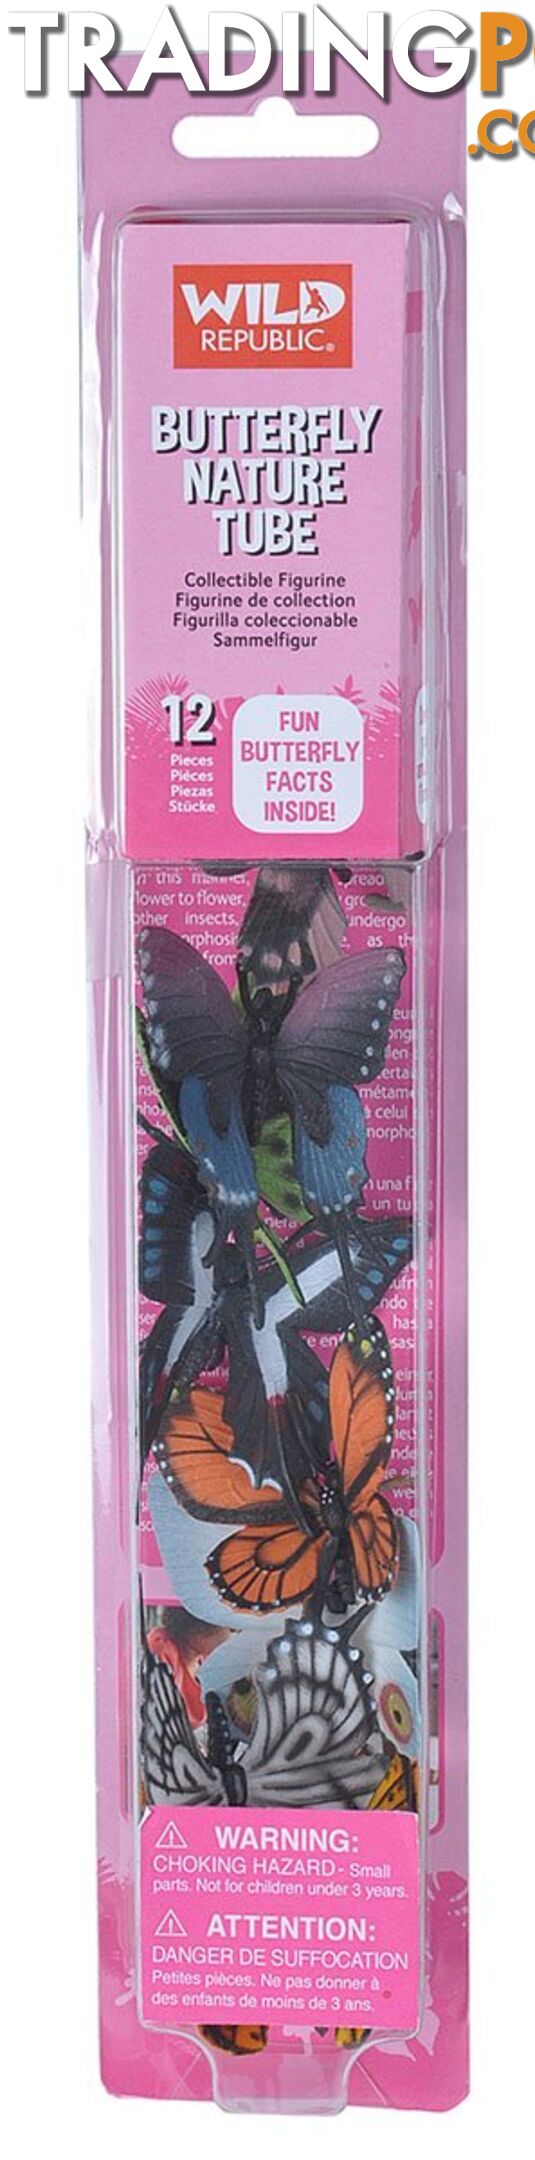 Wild Republic Nature Tubes Butterfly Figurines Wr12889 - 092389128895